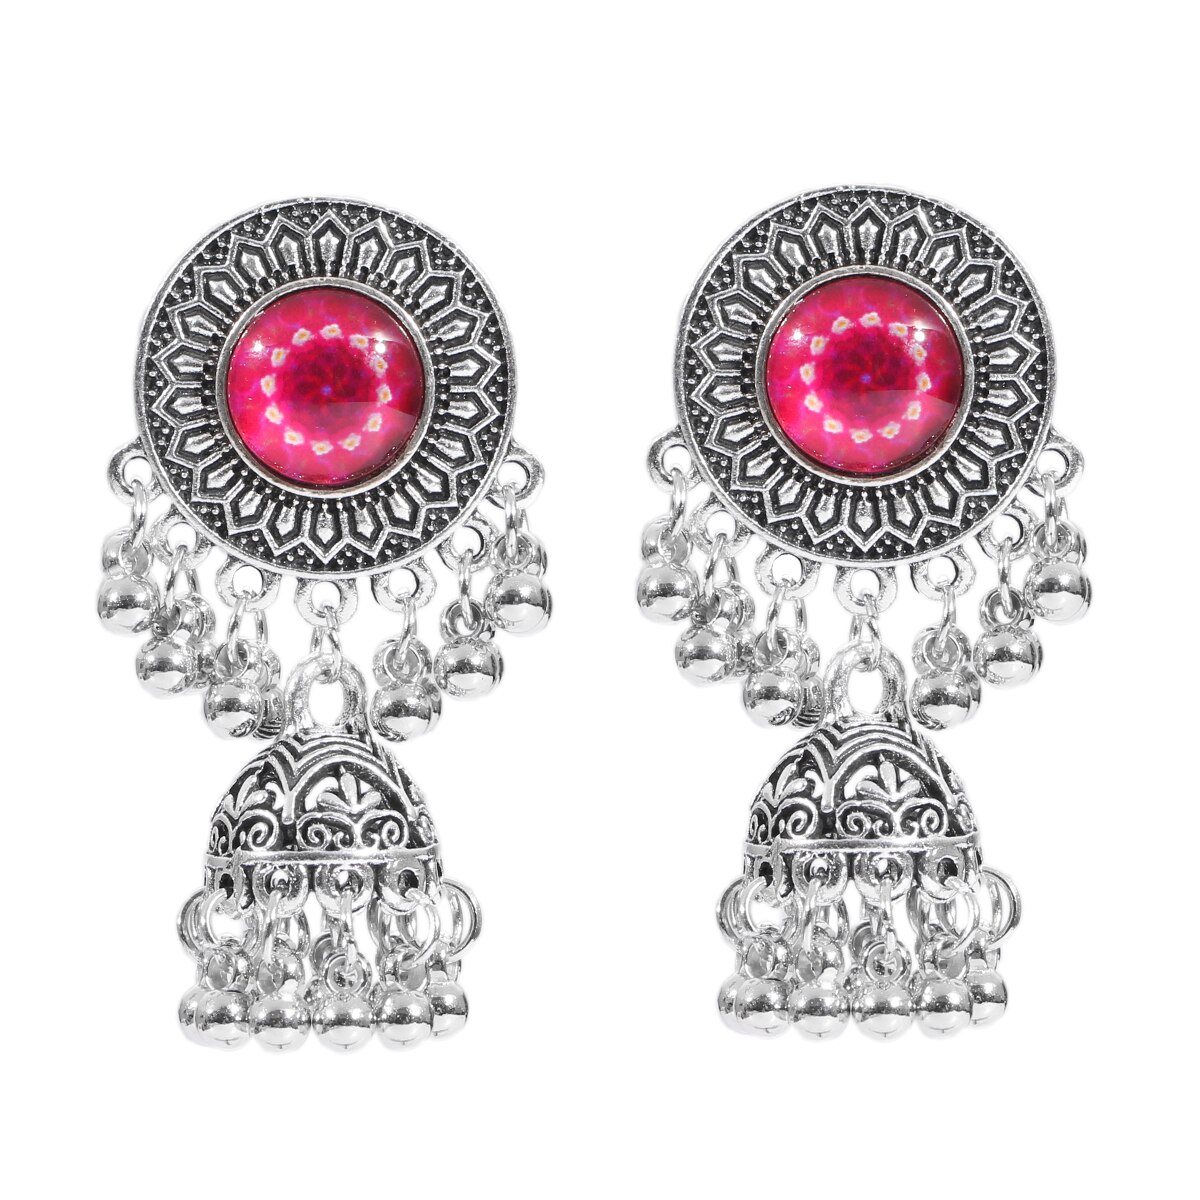 Classic-Vintage-Silver-Color-Alloy-Carved-Bollywood-Oxidized-Earrings-For-Women-Ethnic-Rose-Red-Jhum-1005003651700580-5